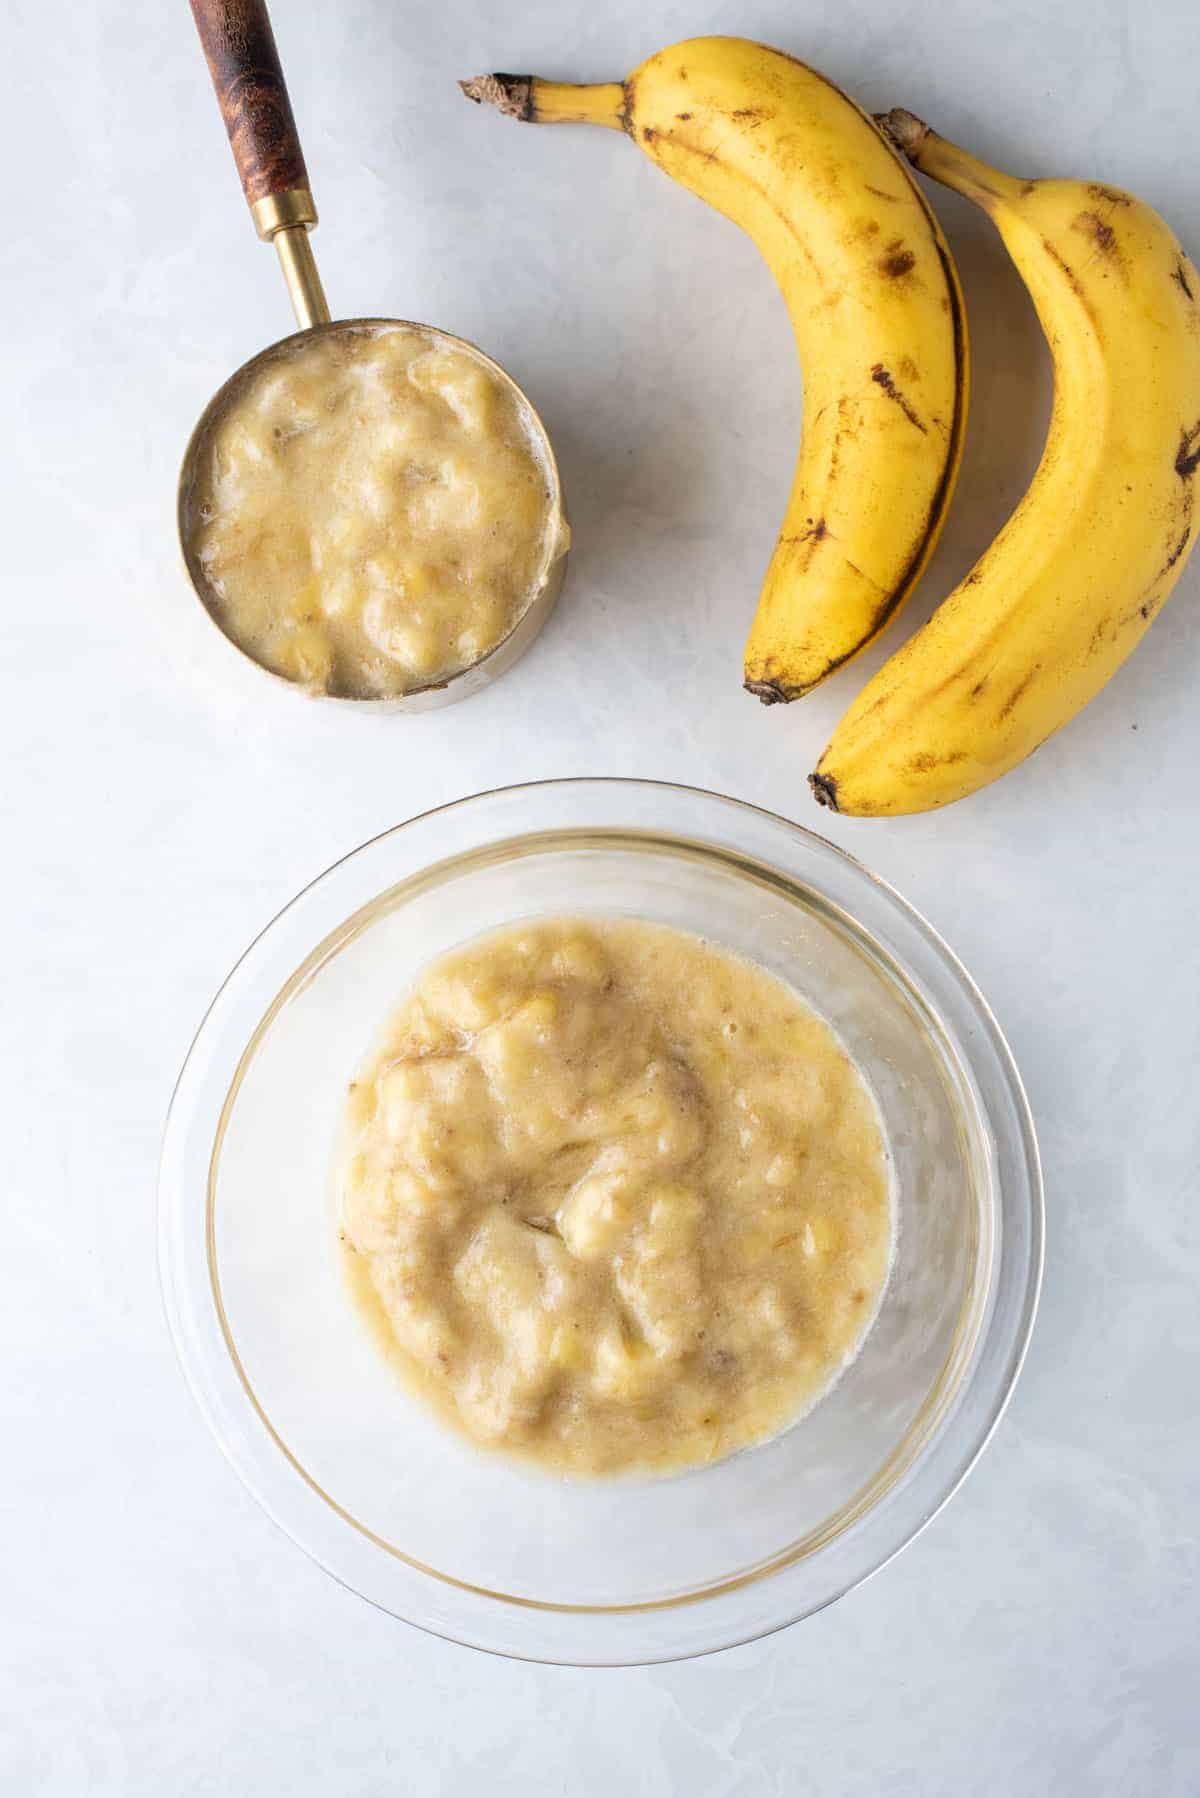 overhead view of two whole bananas, a measuring cup full of mashed banana and clear glass bowl full of mashed banana